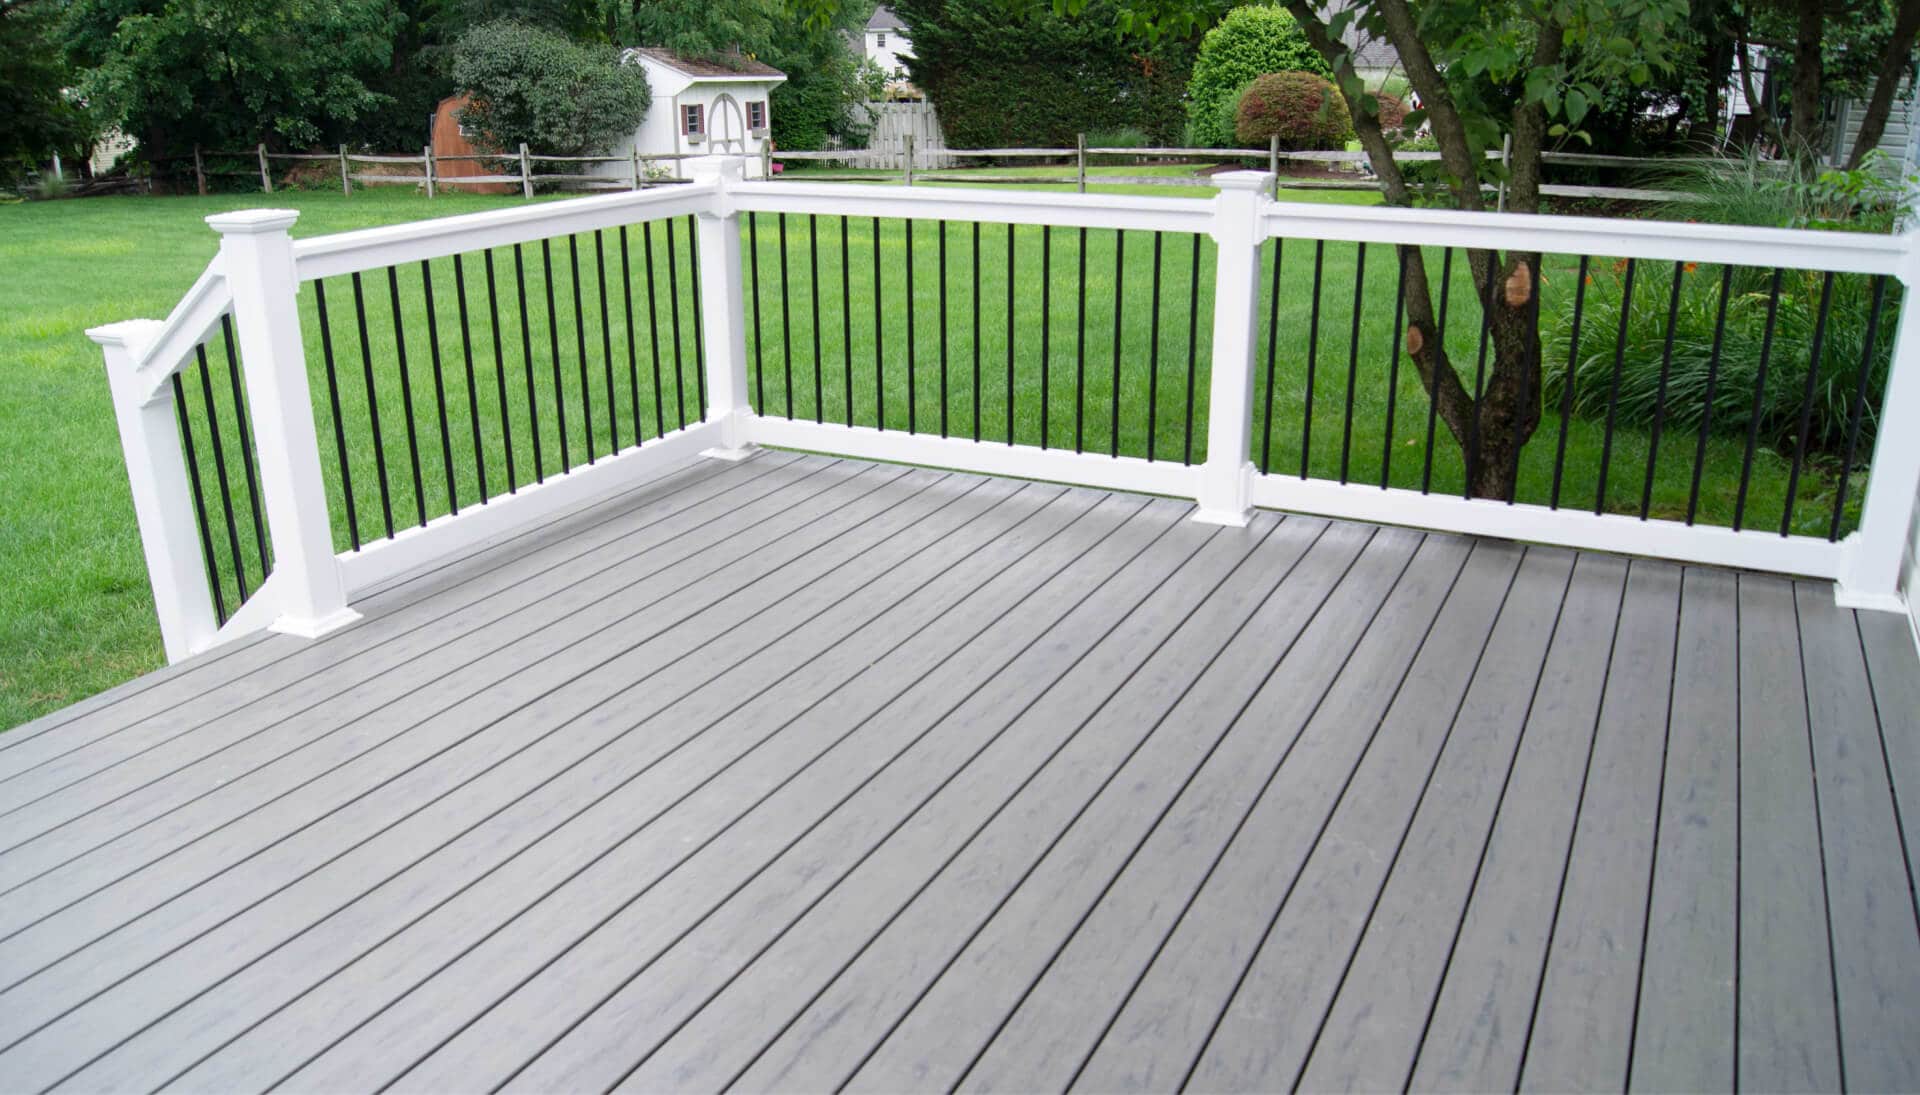 Specialists in deck railing and covers Bismarck, North Dakota